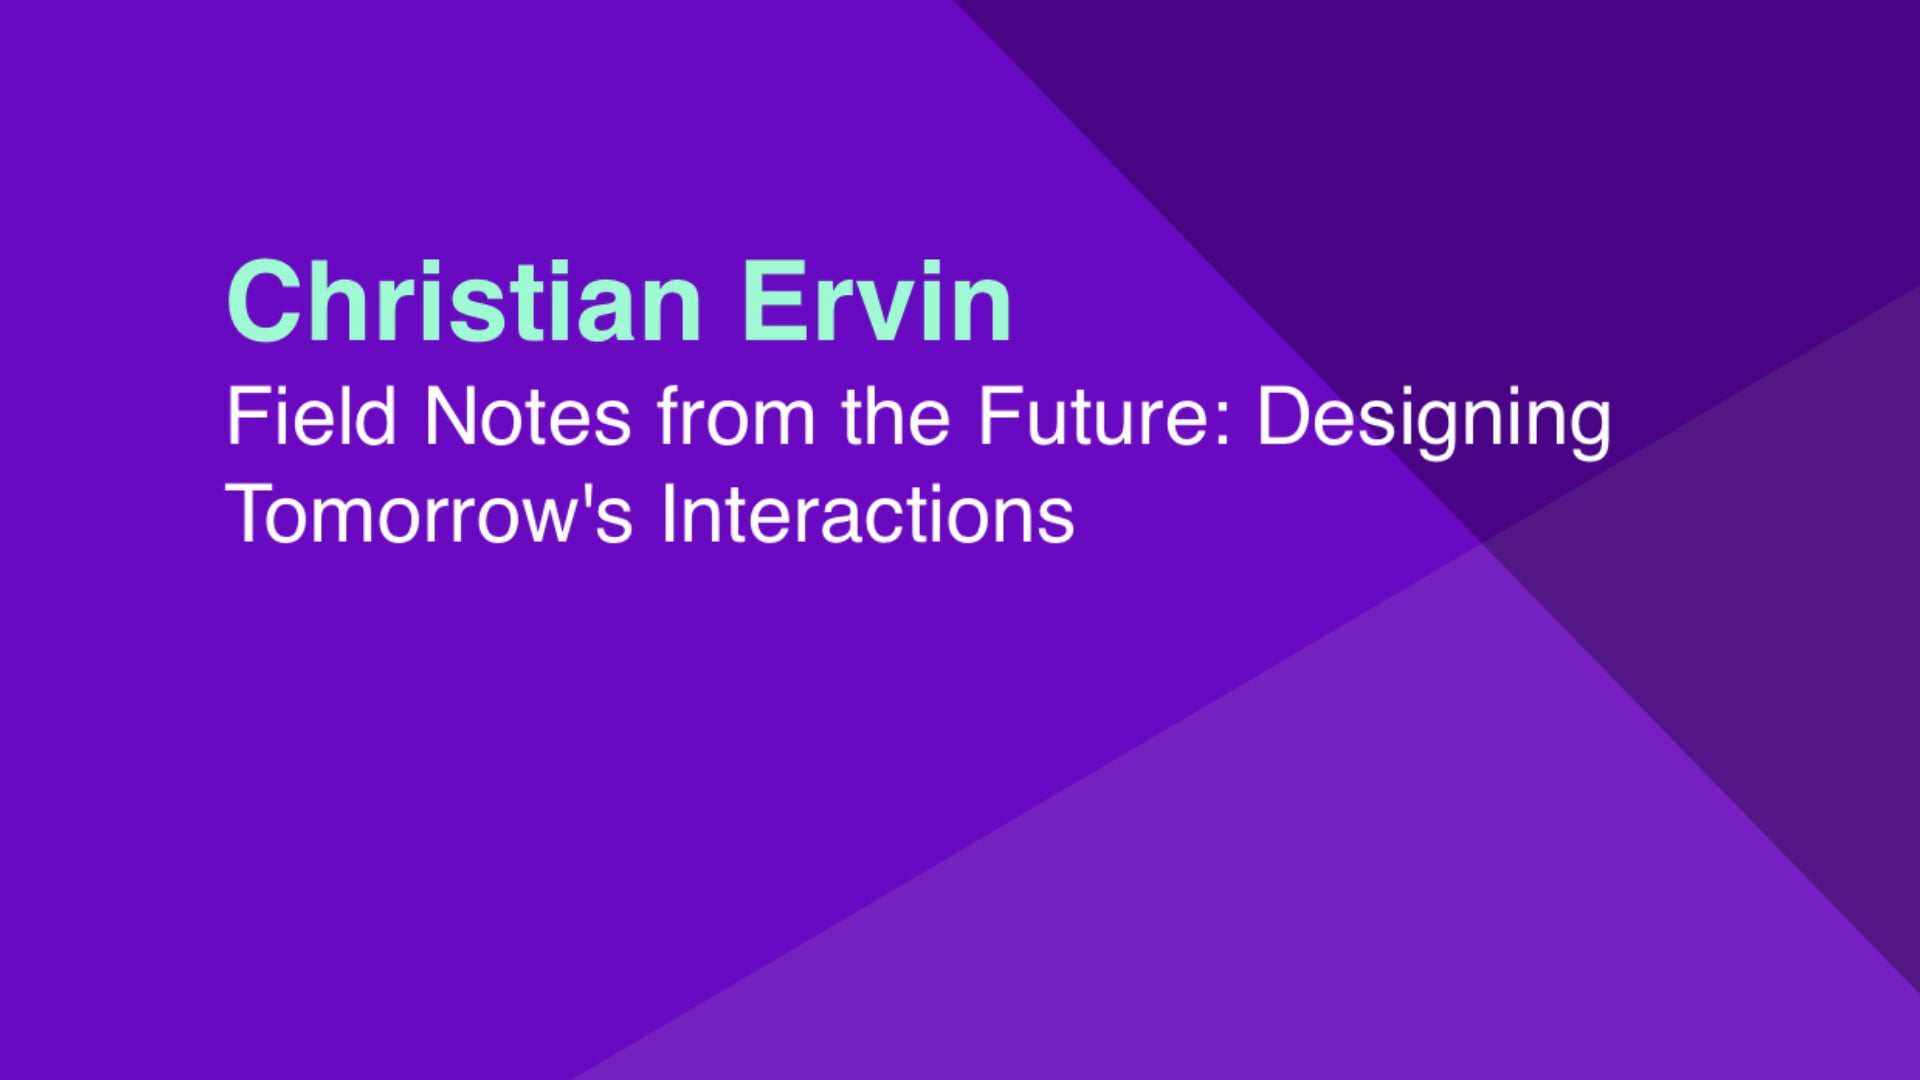 Field Notes from the Future: Designing Tomorrow’s Interactions